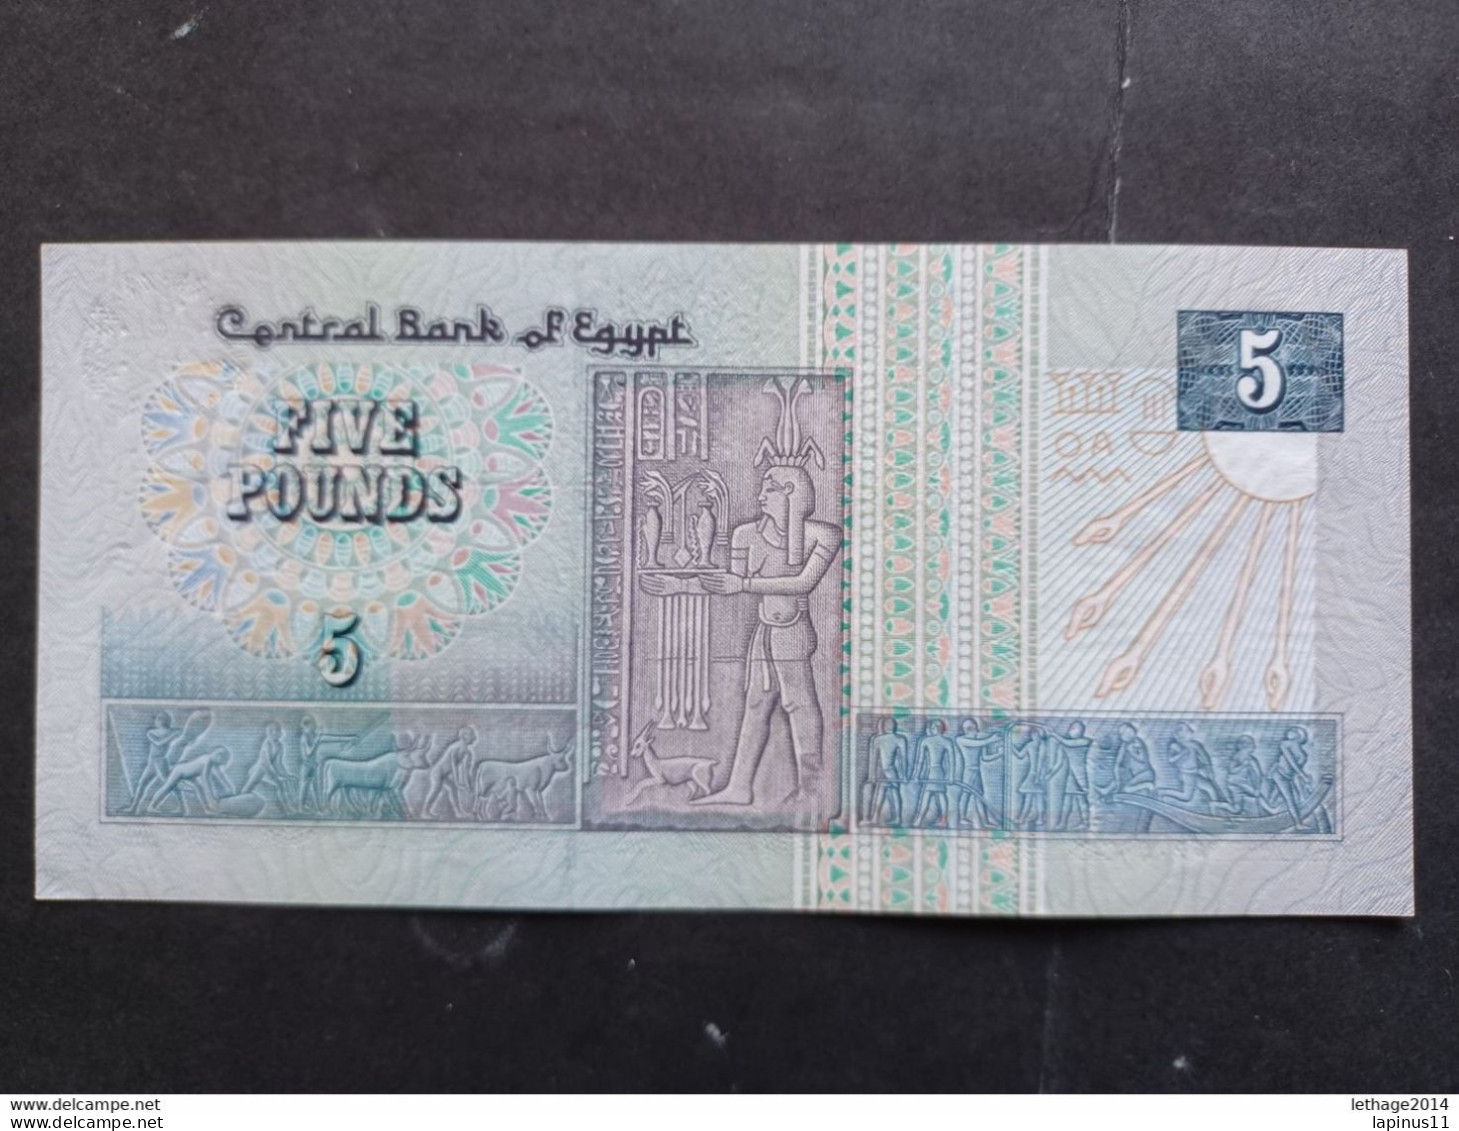 BANKNOTE EGYPT EGYPT 5 POUNDS 1993 UNCIRCULATED - Aegypten